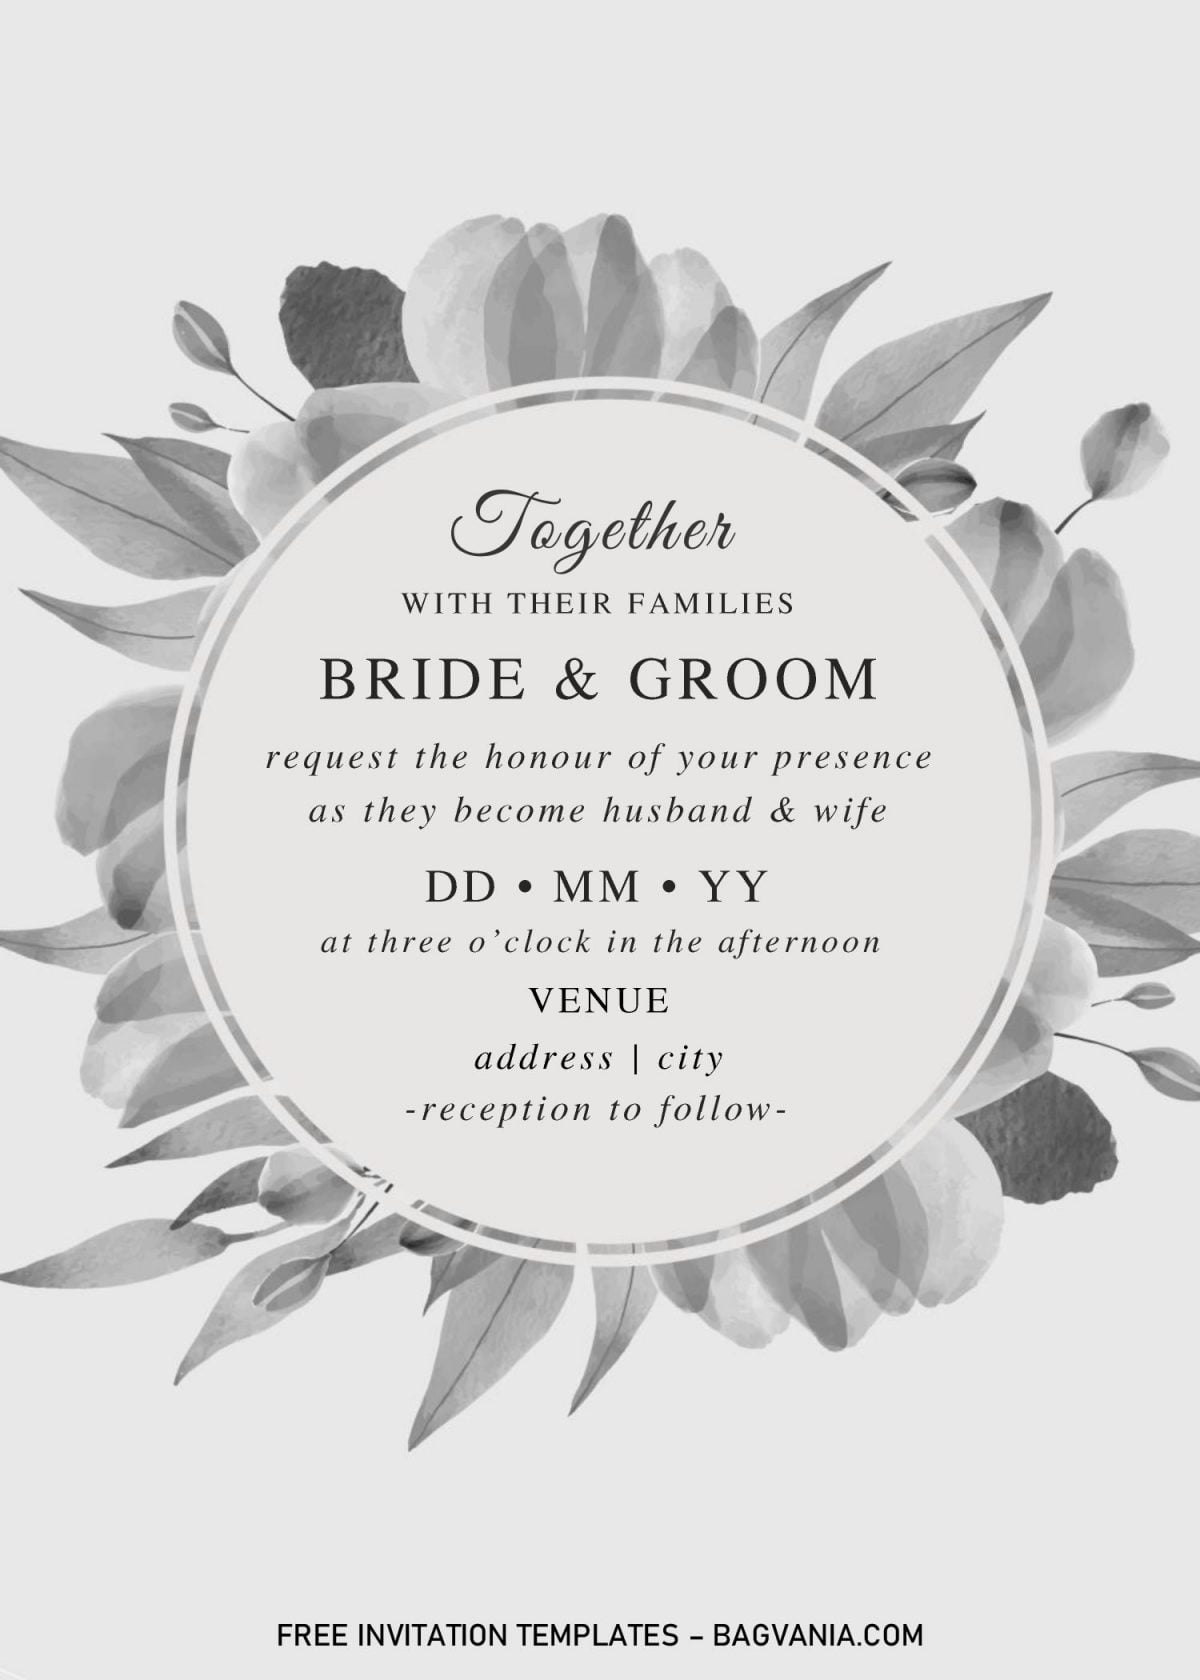 Black And White Wedding Invitation Templates - Editable With MS Word and has elegant typography